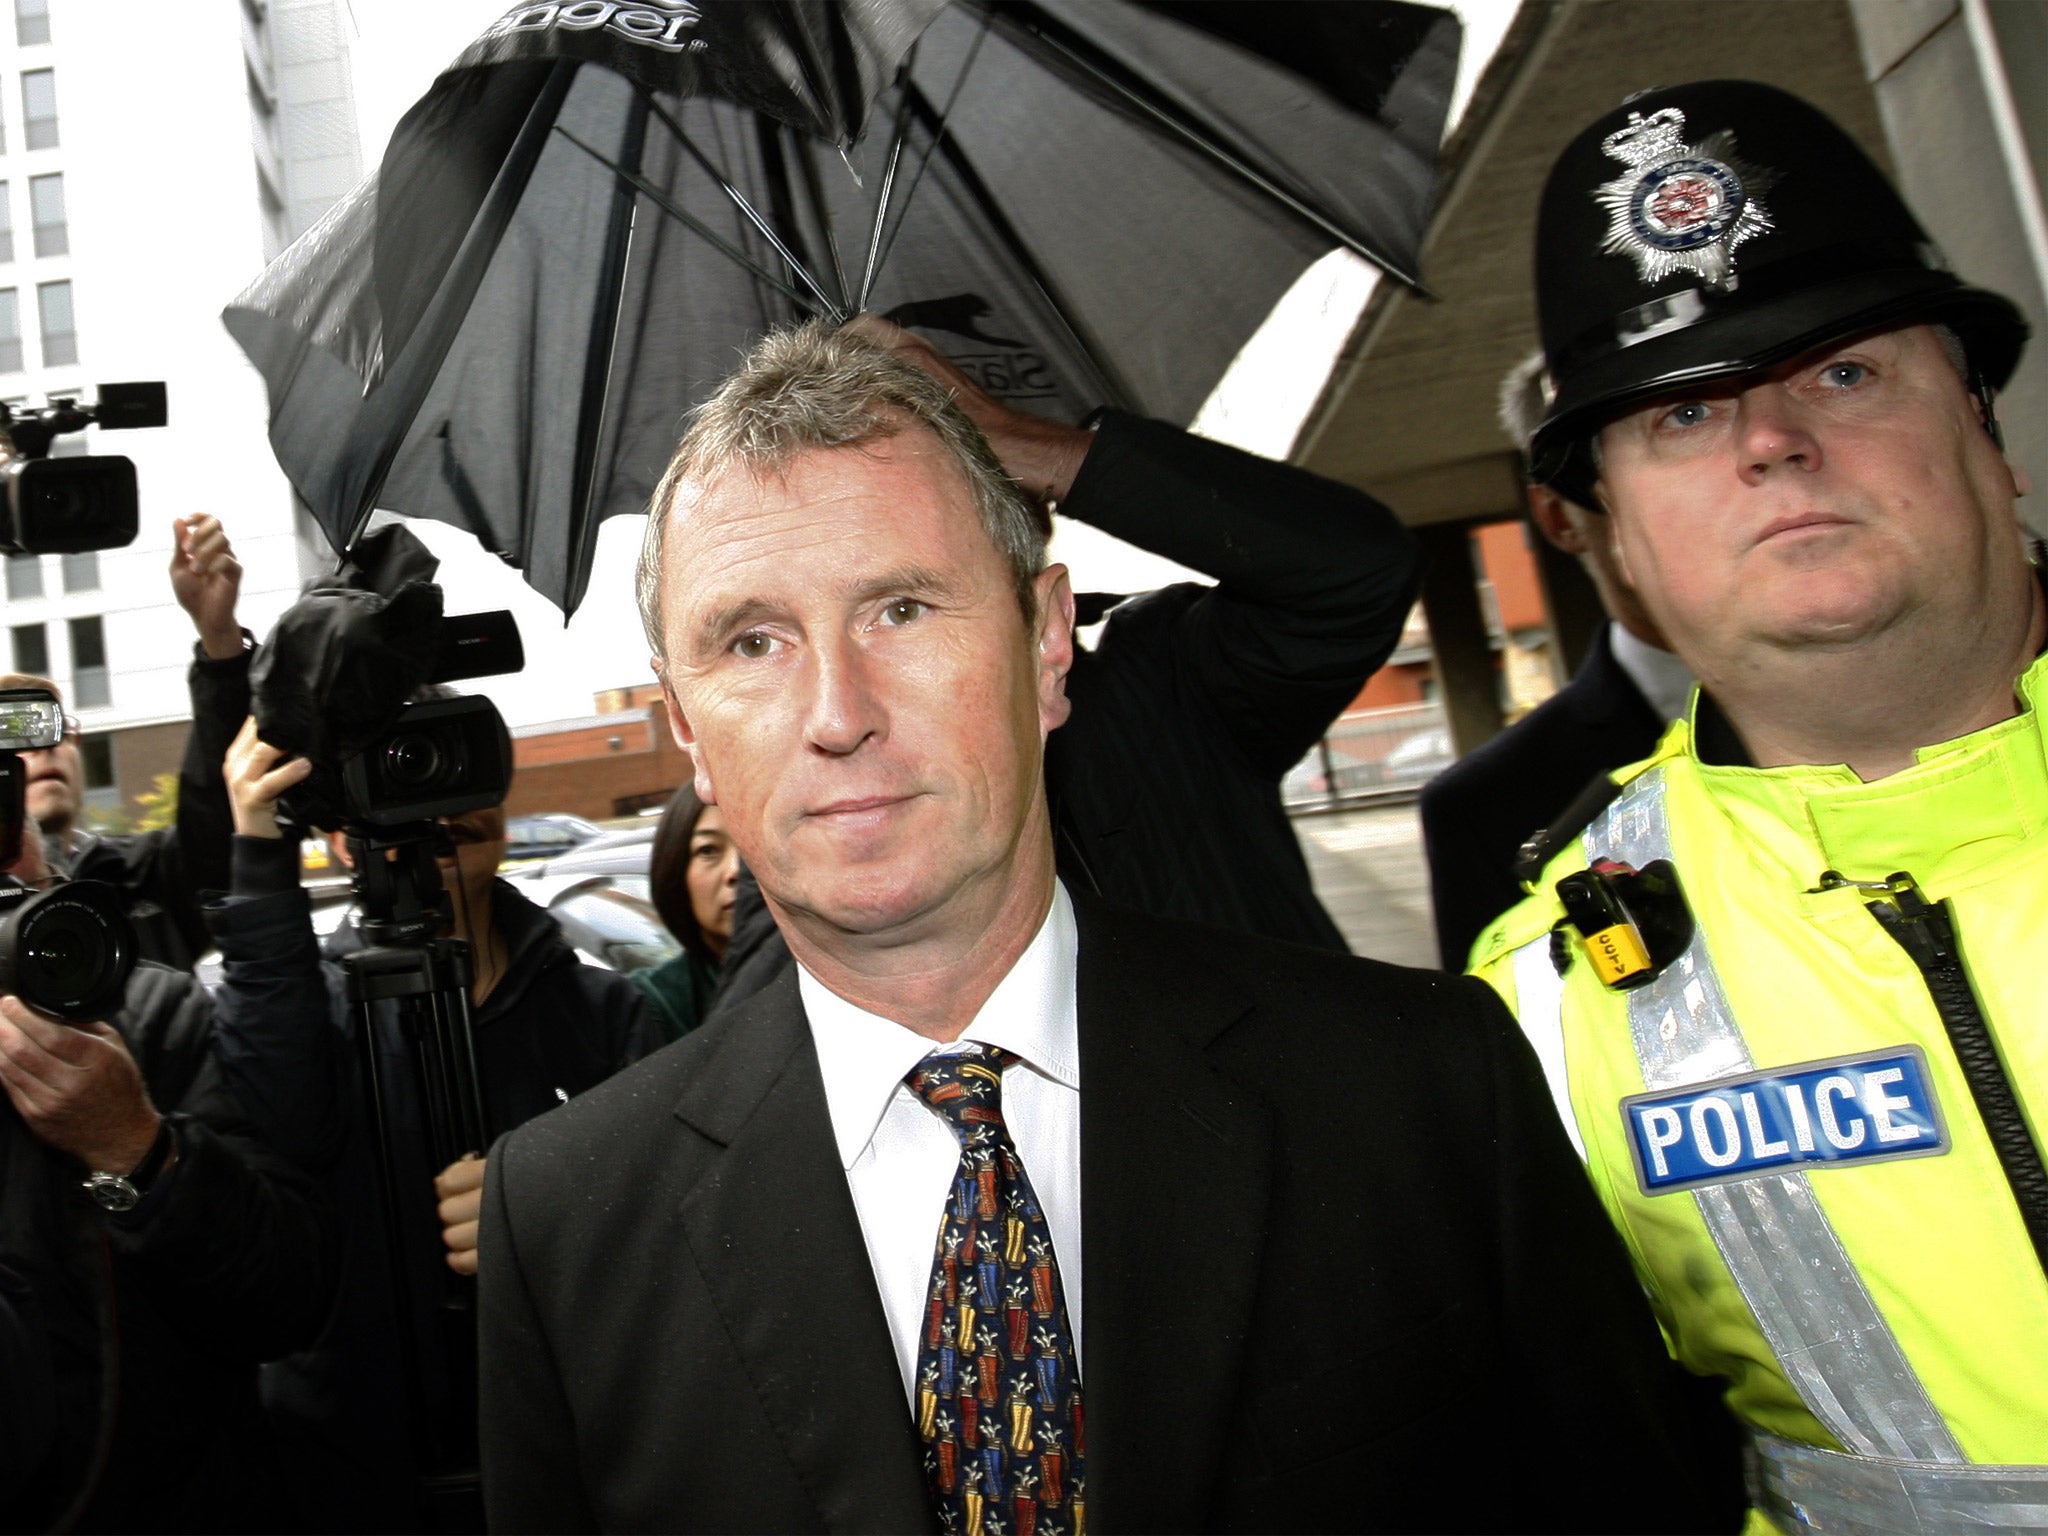 Nigel Evans MP was arrested in 2013 and eventually found not guilty of rape and sexual assaults